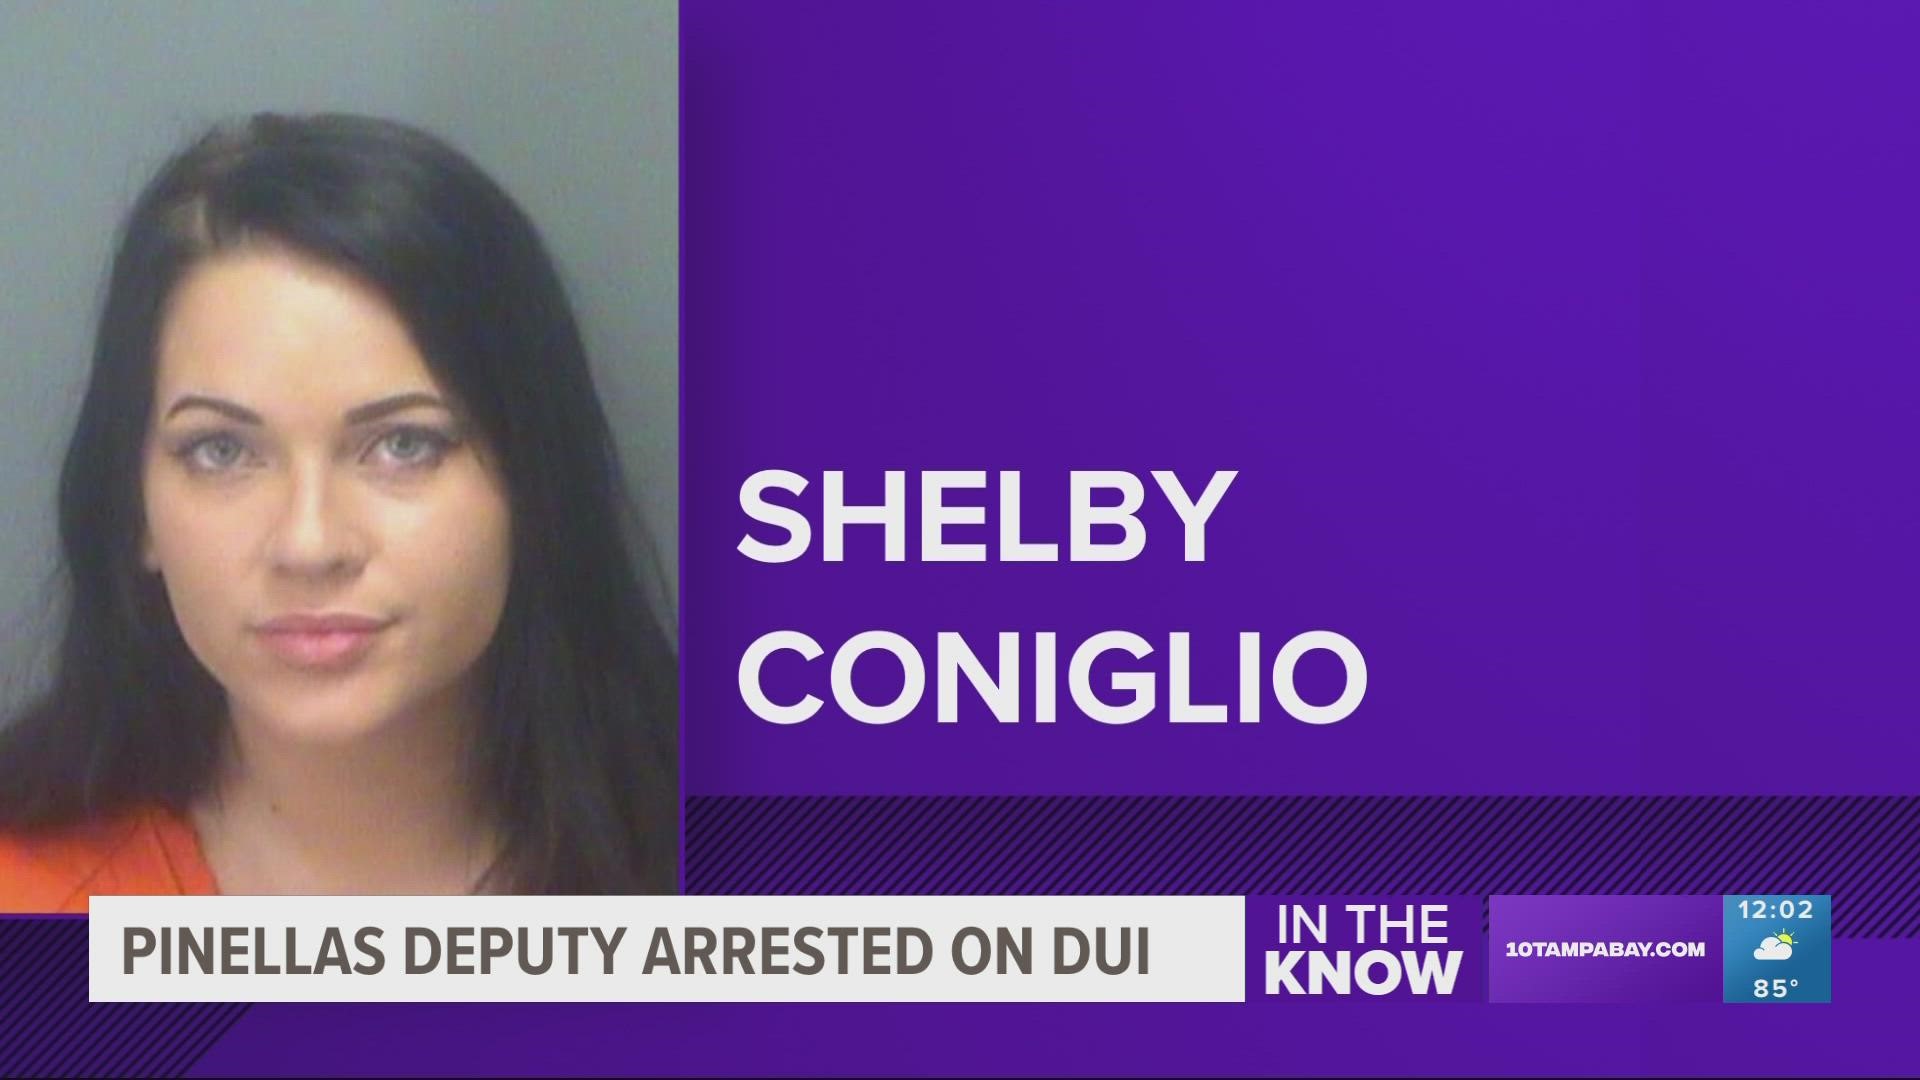 Officers say 26-year-old Shelby Coniglio showed signs of impairment when she was pulled over around 1 a.m. Tuesday.